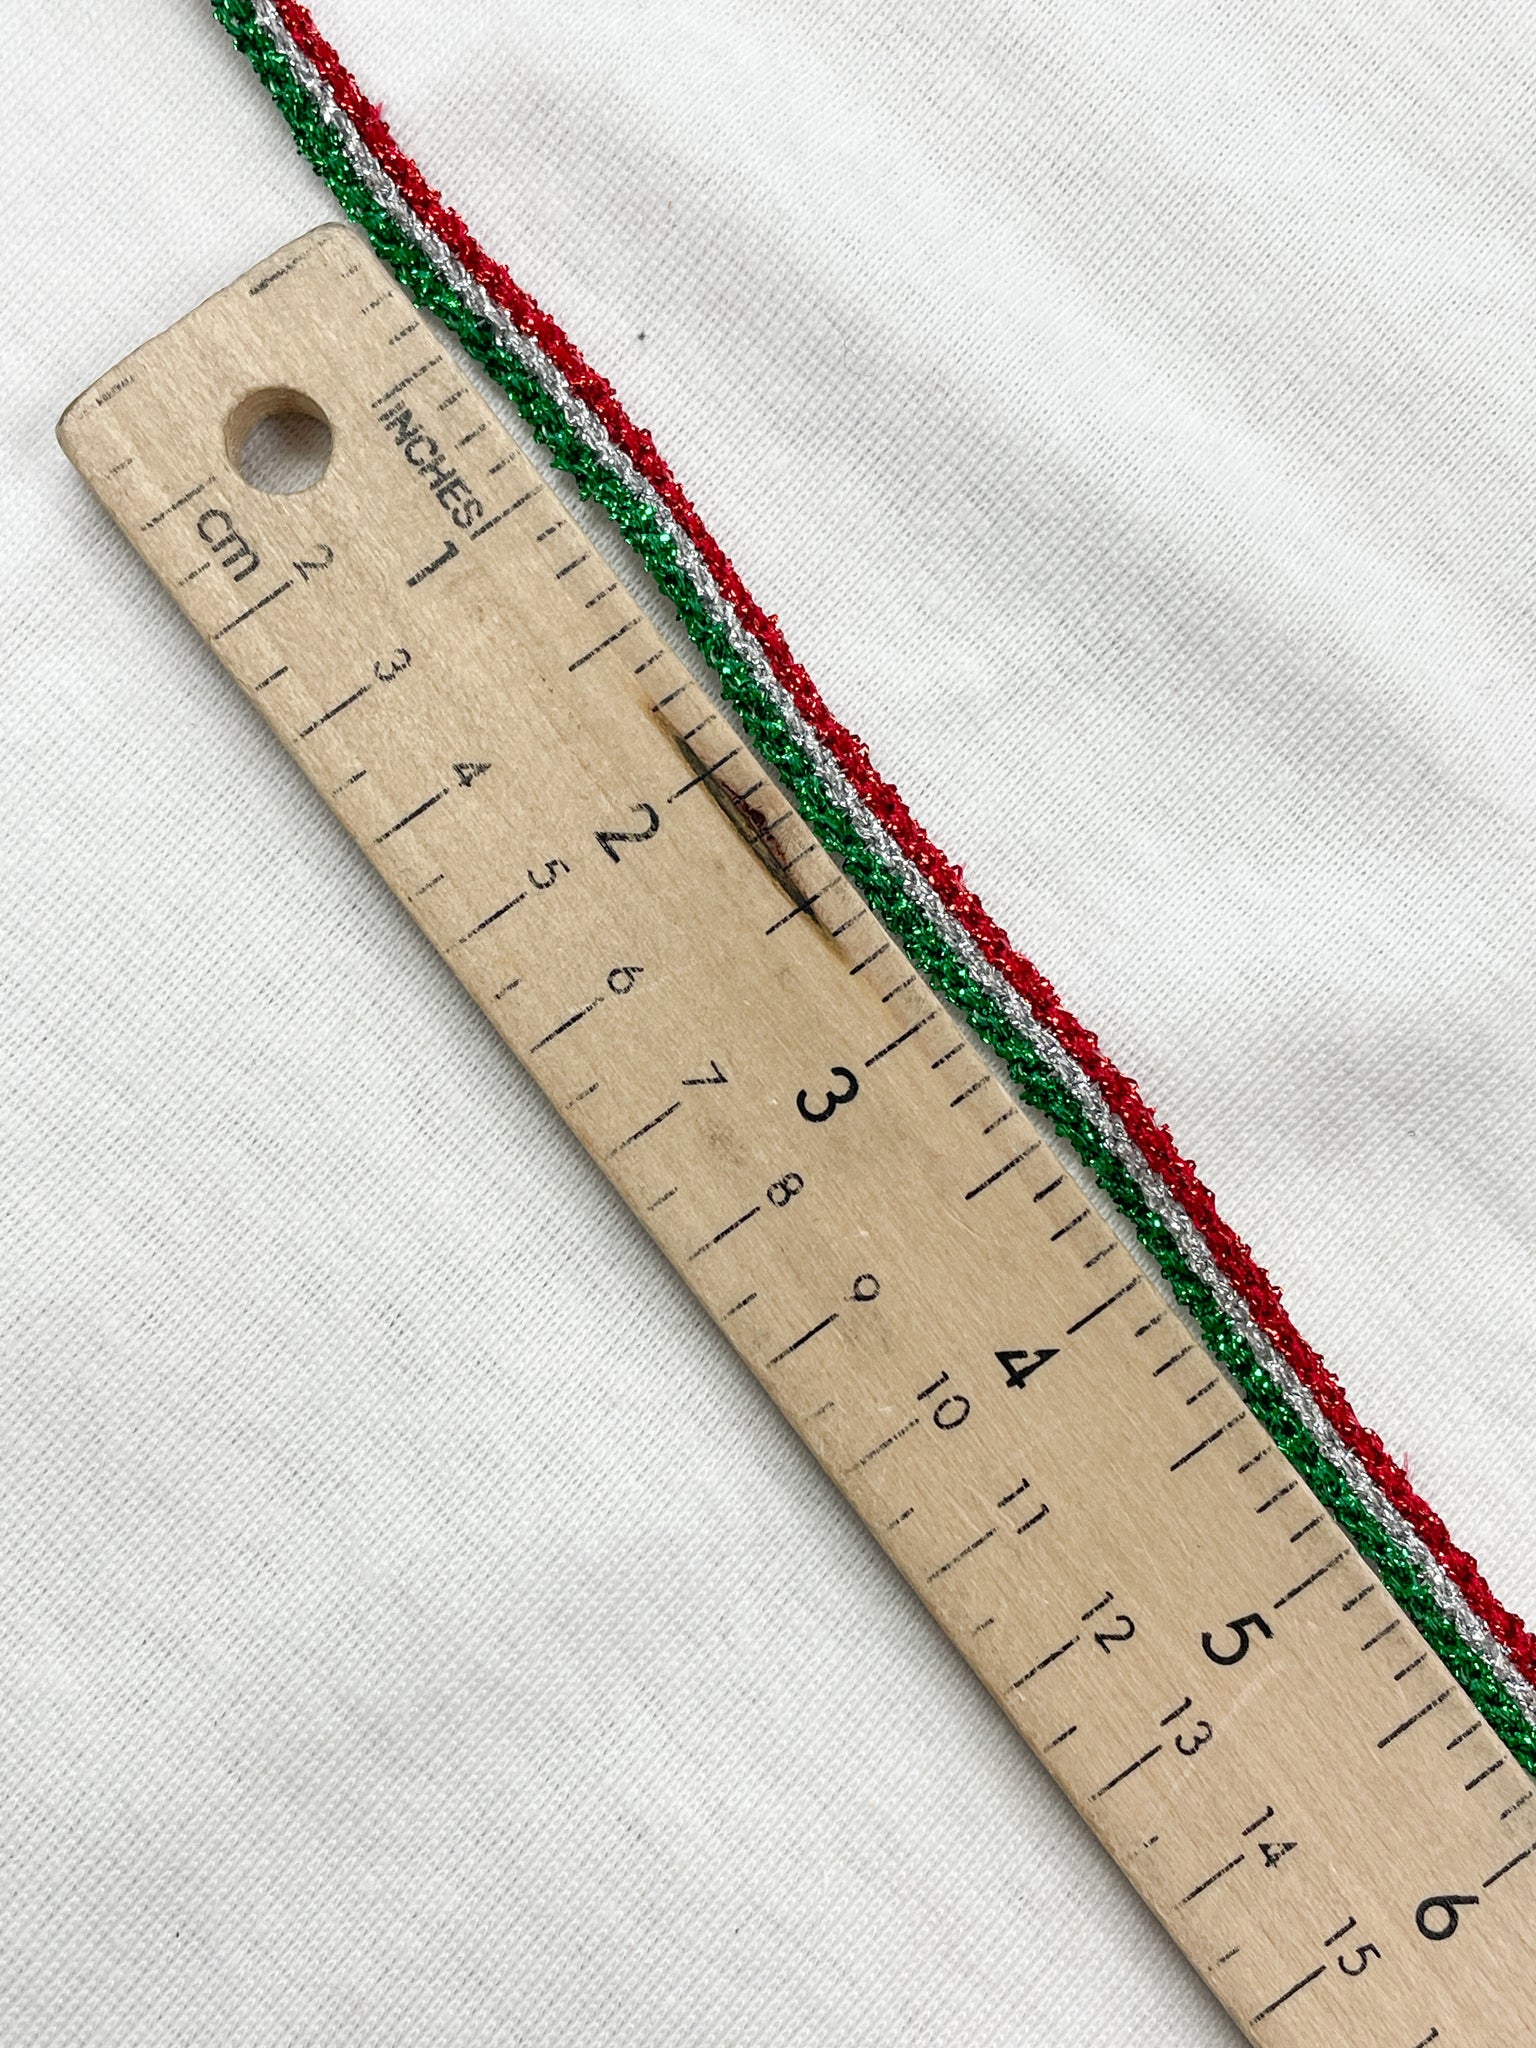 3 YD Metallic Trim - Red, Silver and Green Sparkle